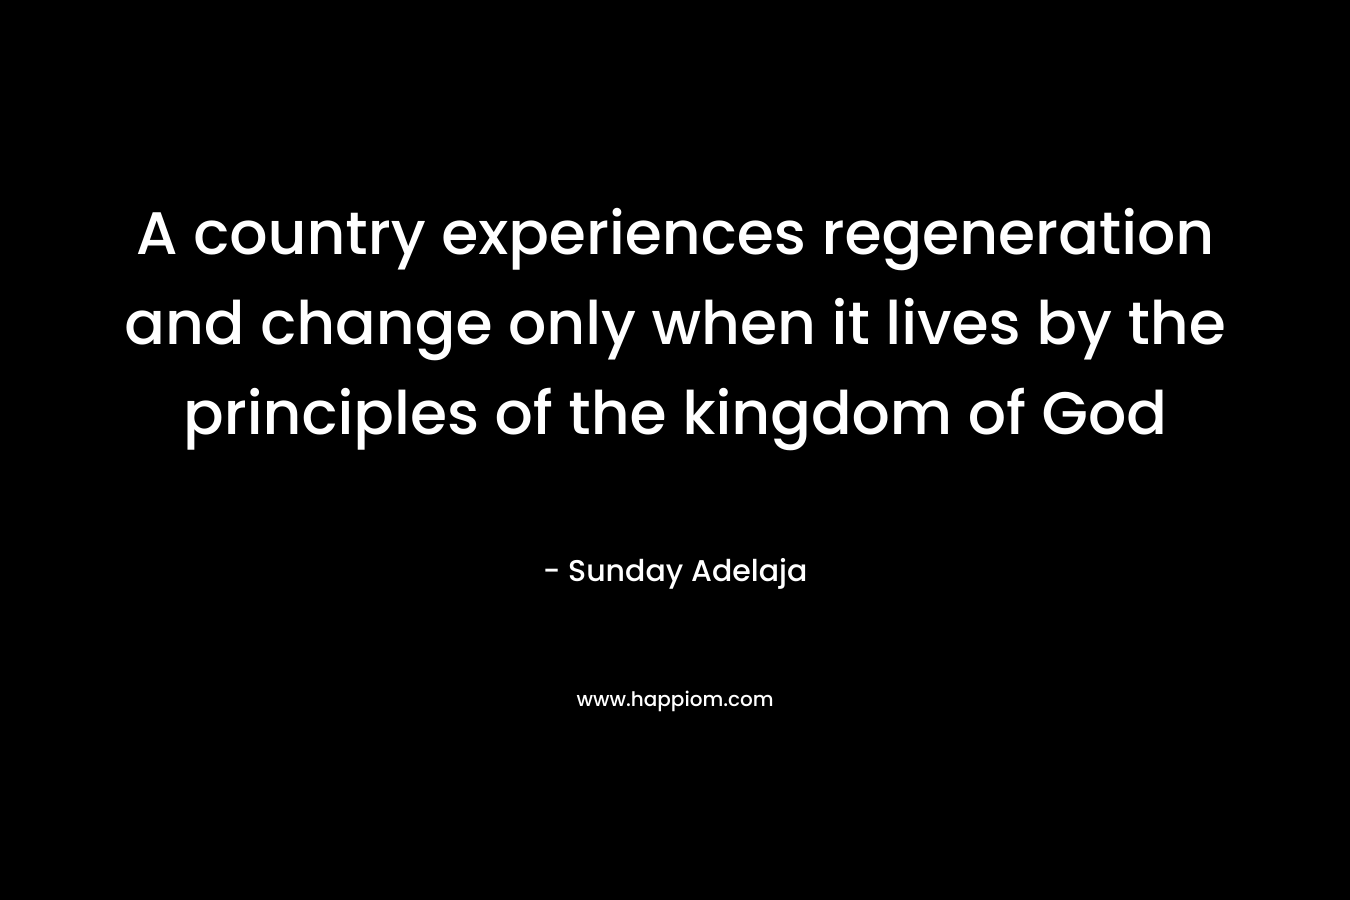 A country experiences regeneration and change only when it lives by the principles of the kingdom of God – Sunday Adelaja